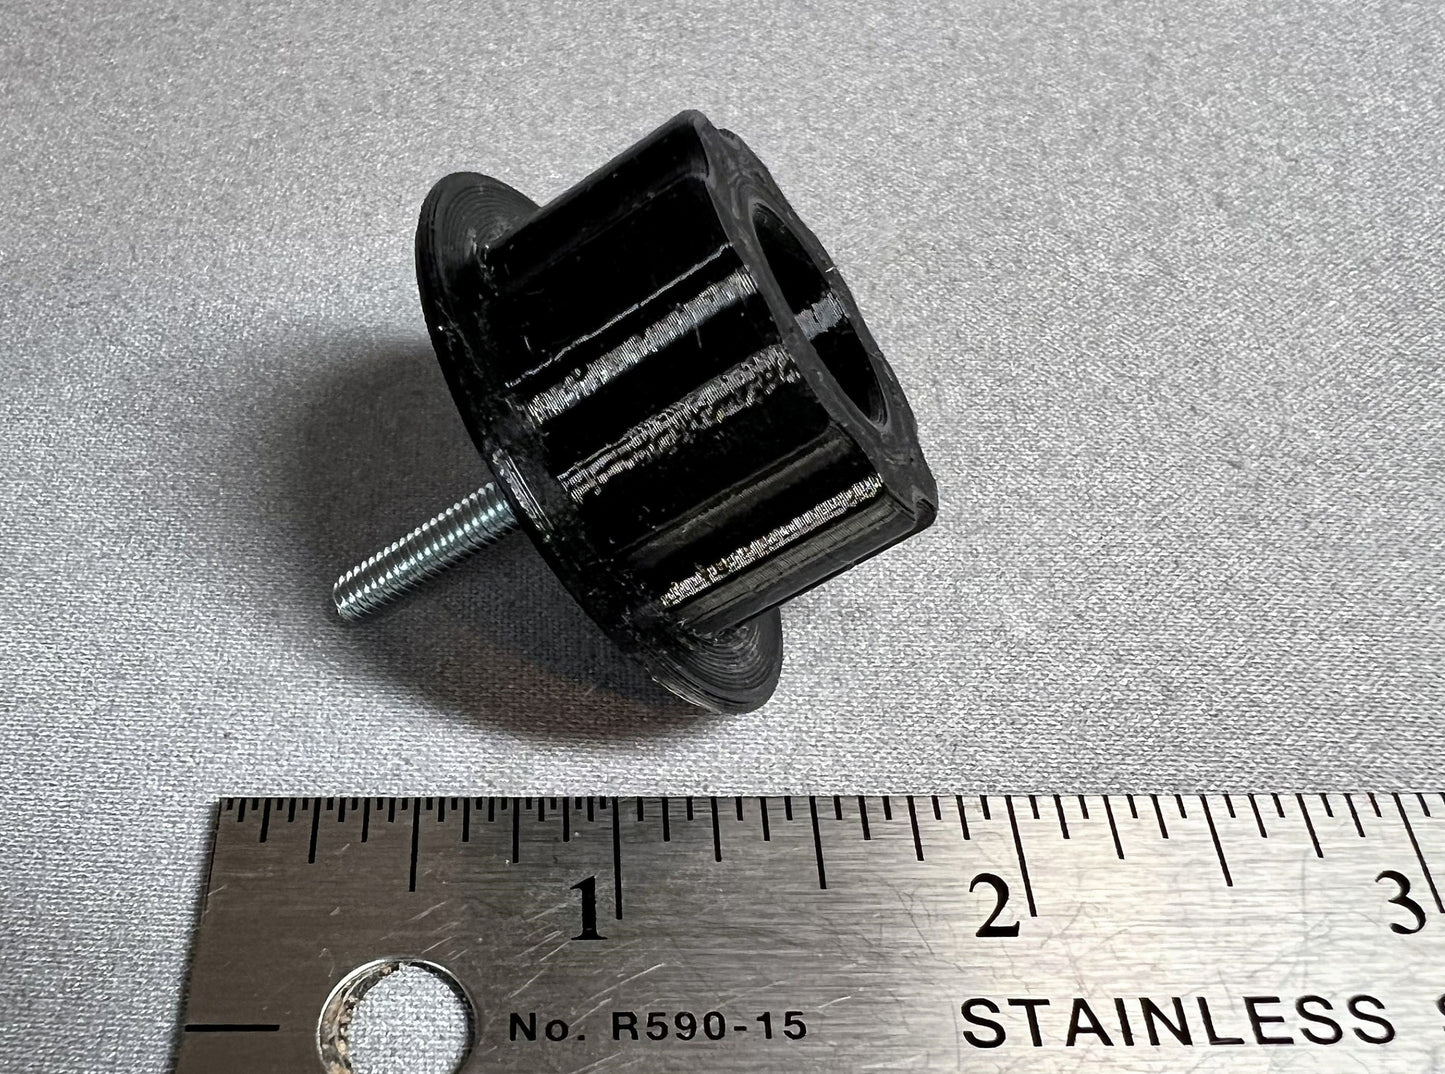 larger knob by ruler - side view